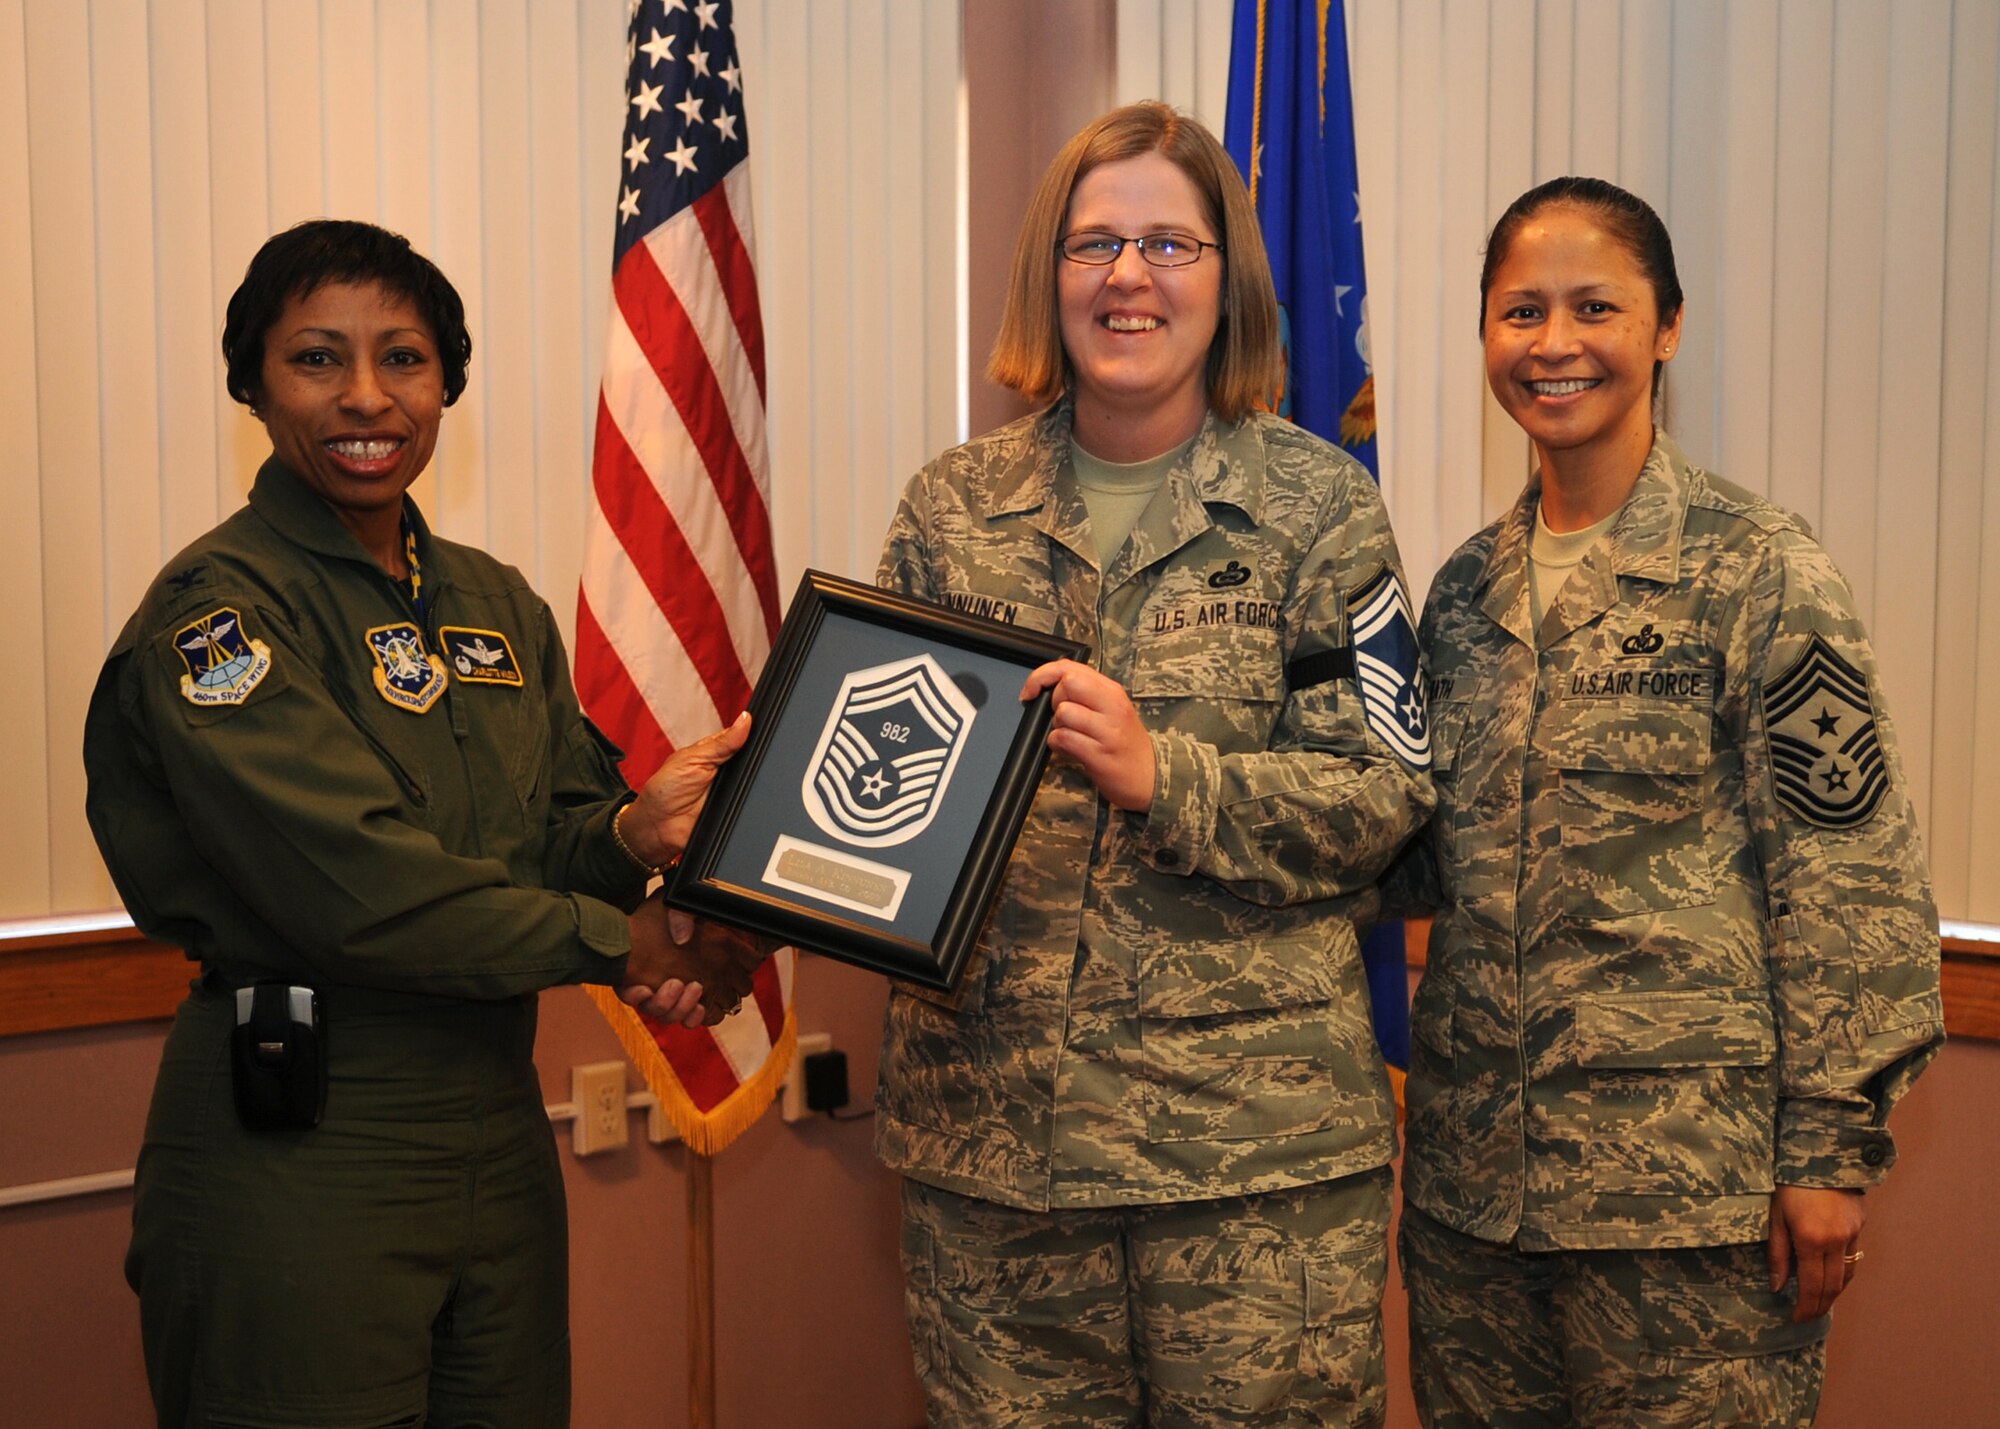 BUCKLEY AIR FORCE BASE, Colo. -- Master Sergeant Lisa Kinnunen is congratulated by Col. Charlotte Wilson, 460th Space Wing Vice Commander and 460th Space Wing Command Chief Master Sergeant Arleen Heath, for her selection to Senior Master Sergeant.   Sergeant Kinnunen was recently one of 1,450 master sergeants to receive the news and the only one at Buckley.  (U.S. Air Force photo by Senior Airman Randi Flaugh)